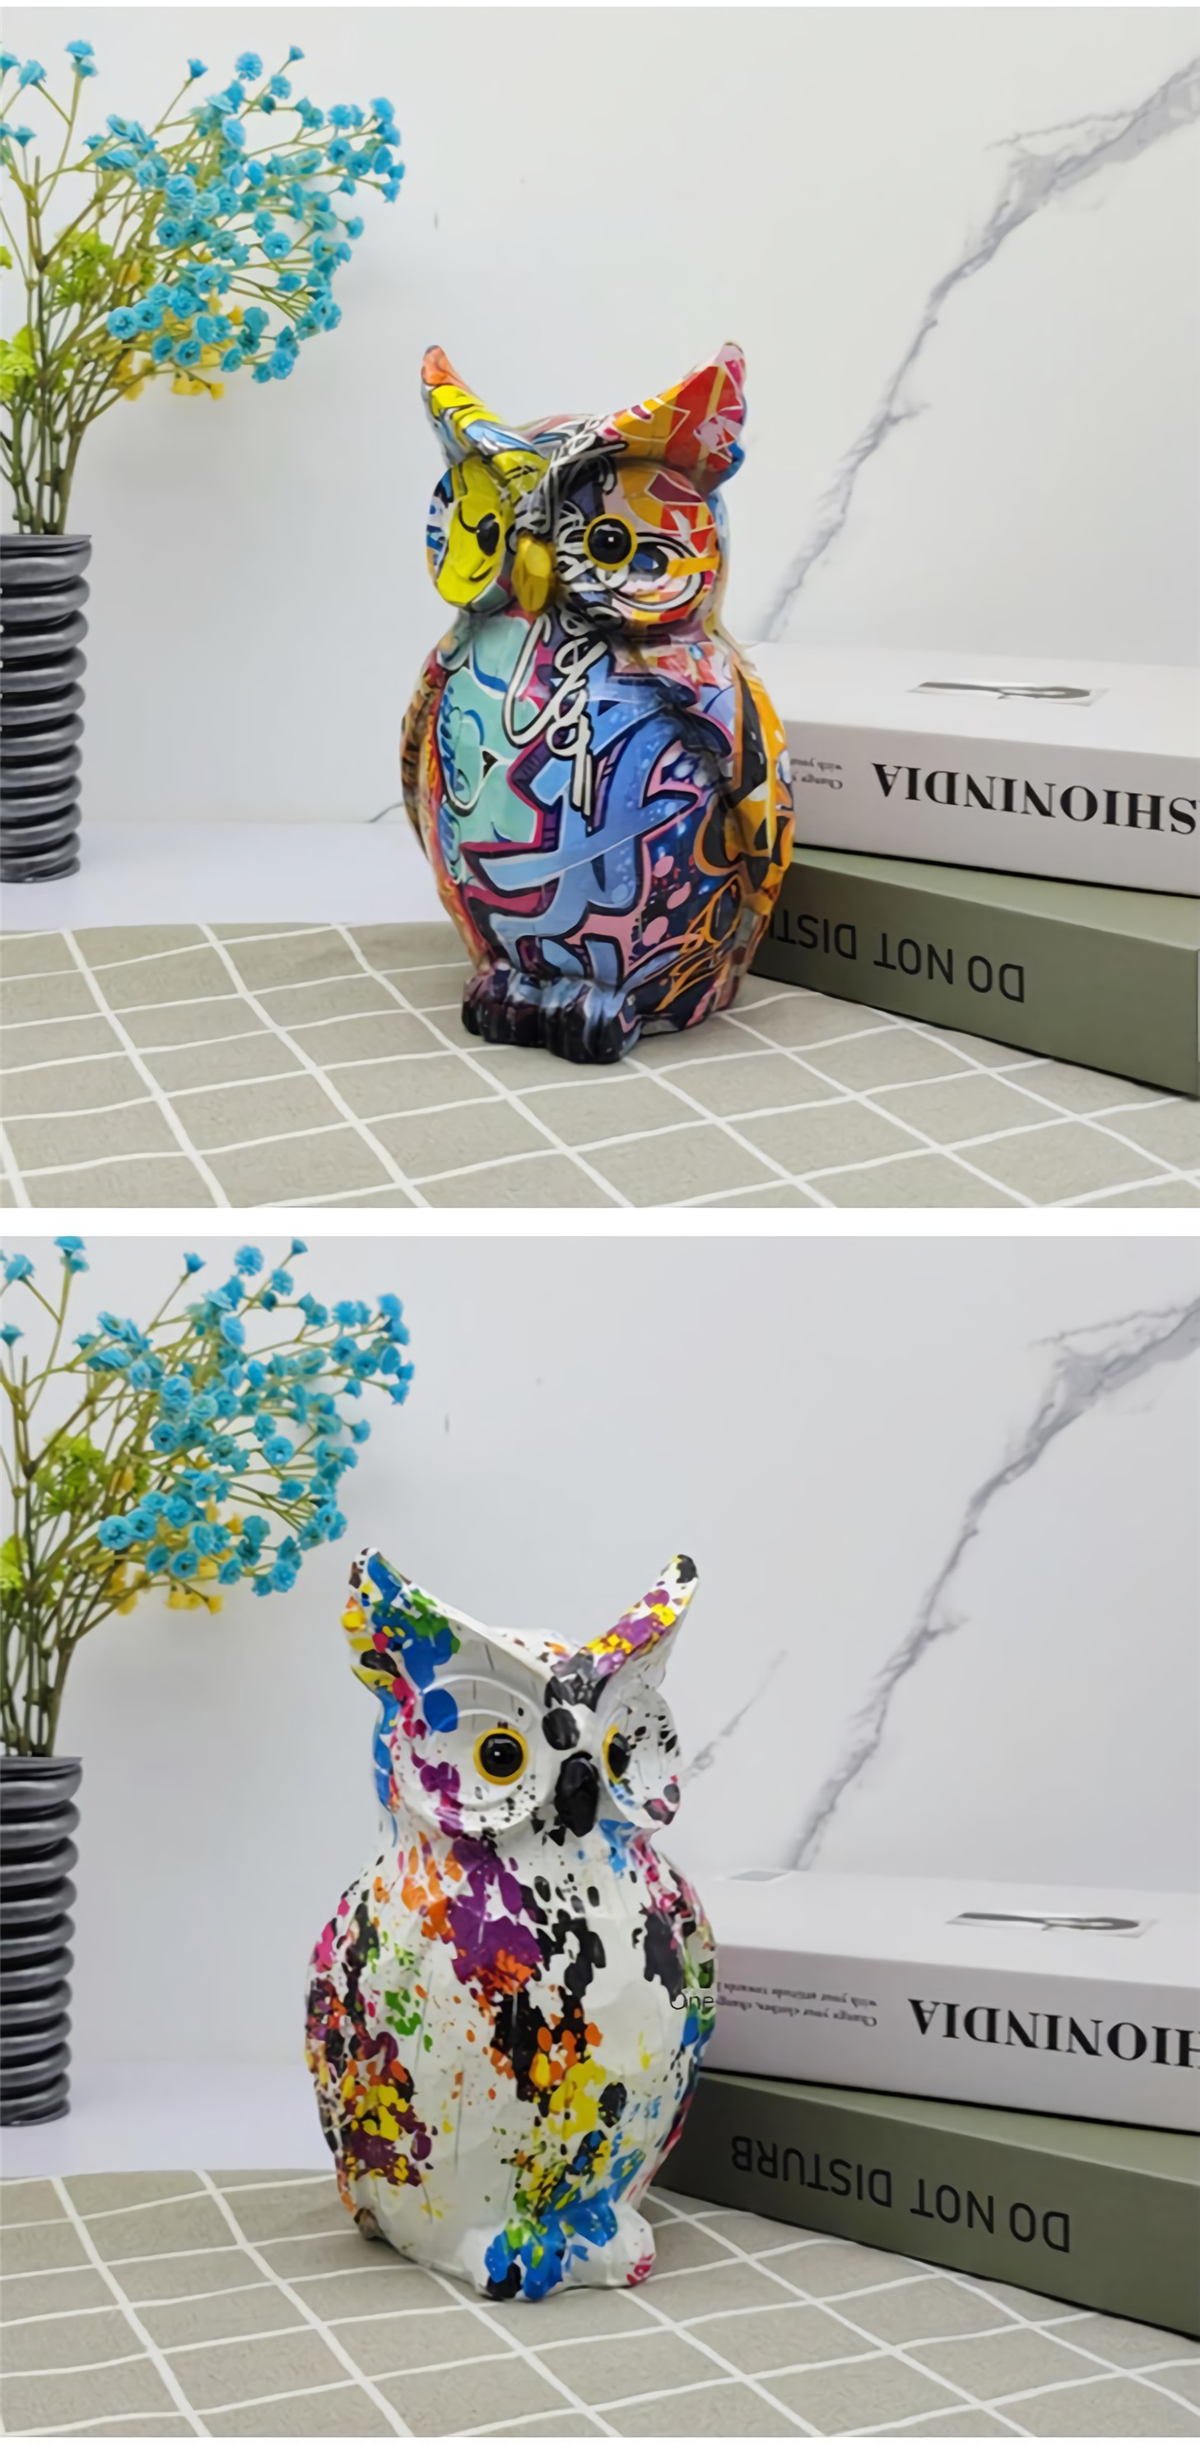 Colorful Owl Ornaments Creative Creative Art Animal Resin Crafts Home Office Desktop Decorations Accessories